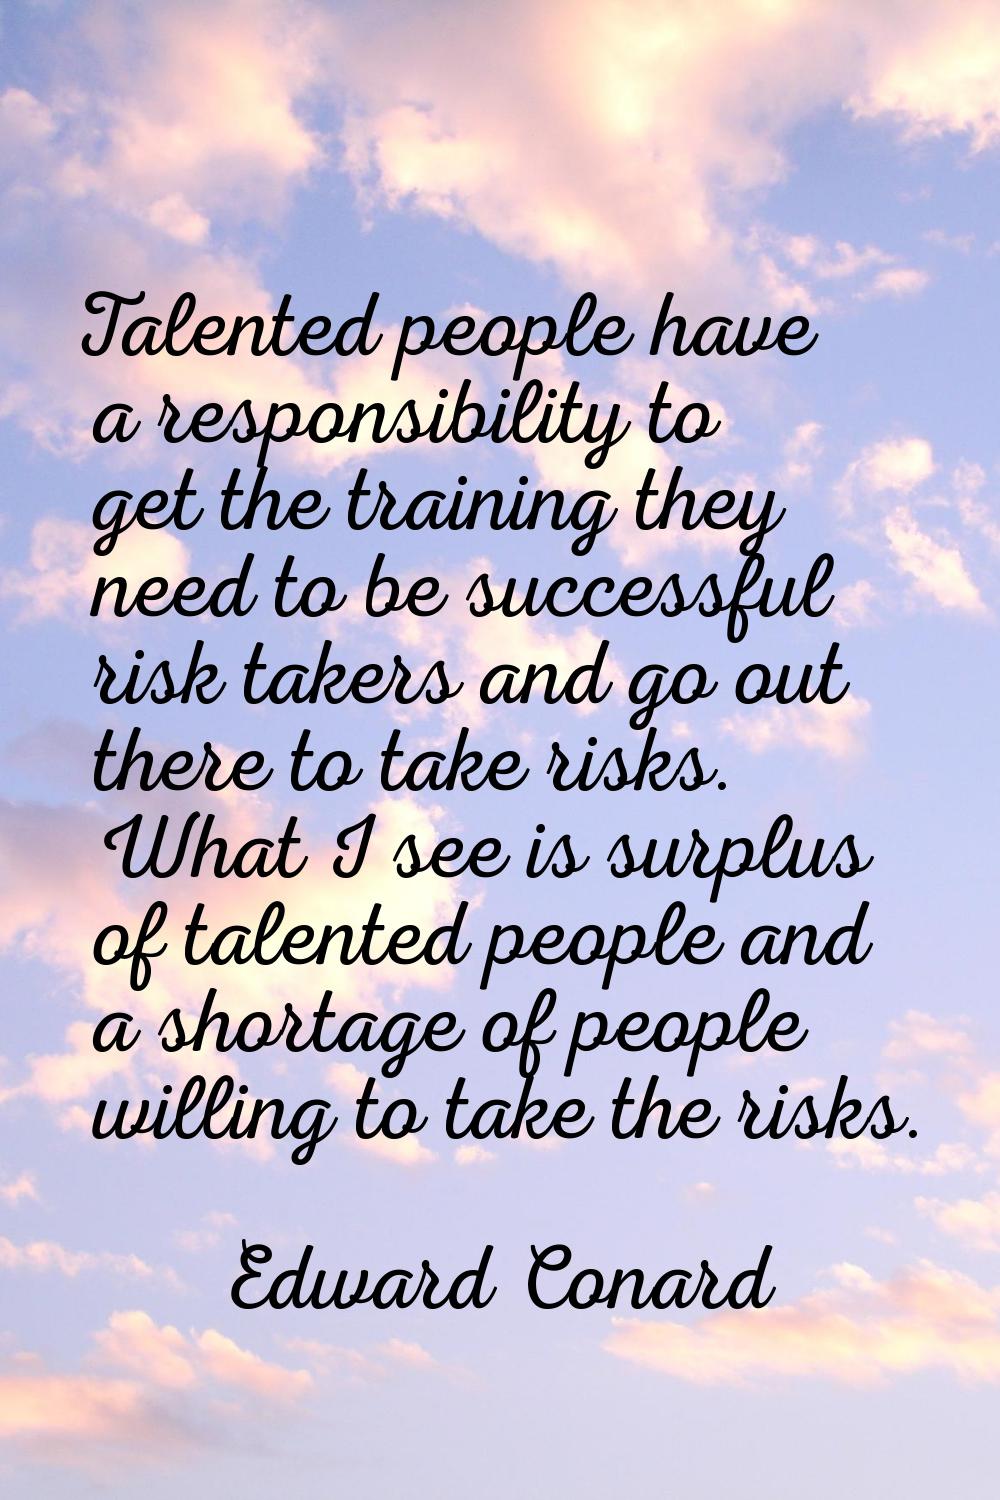 Talented people have a responsibility to get the training they need to be successful risk takers an